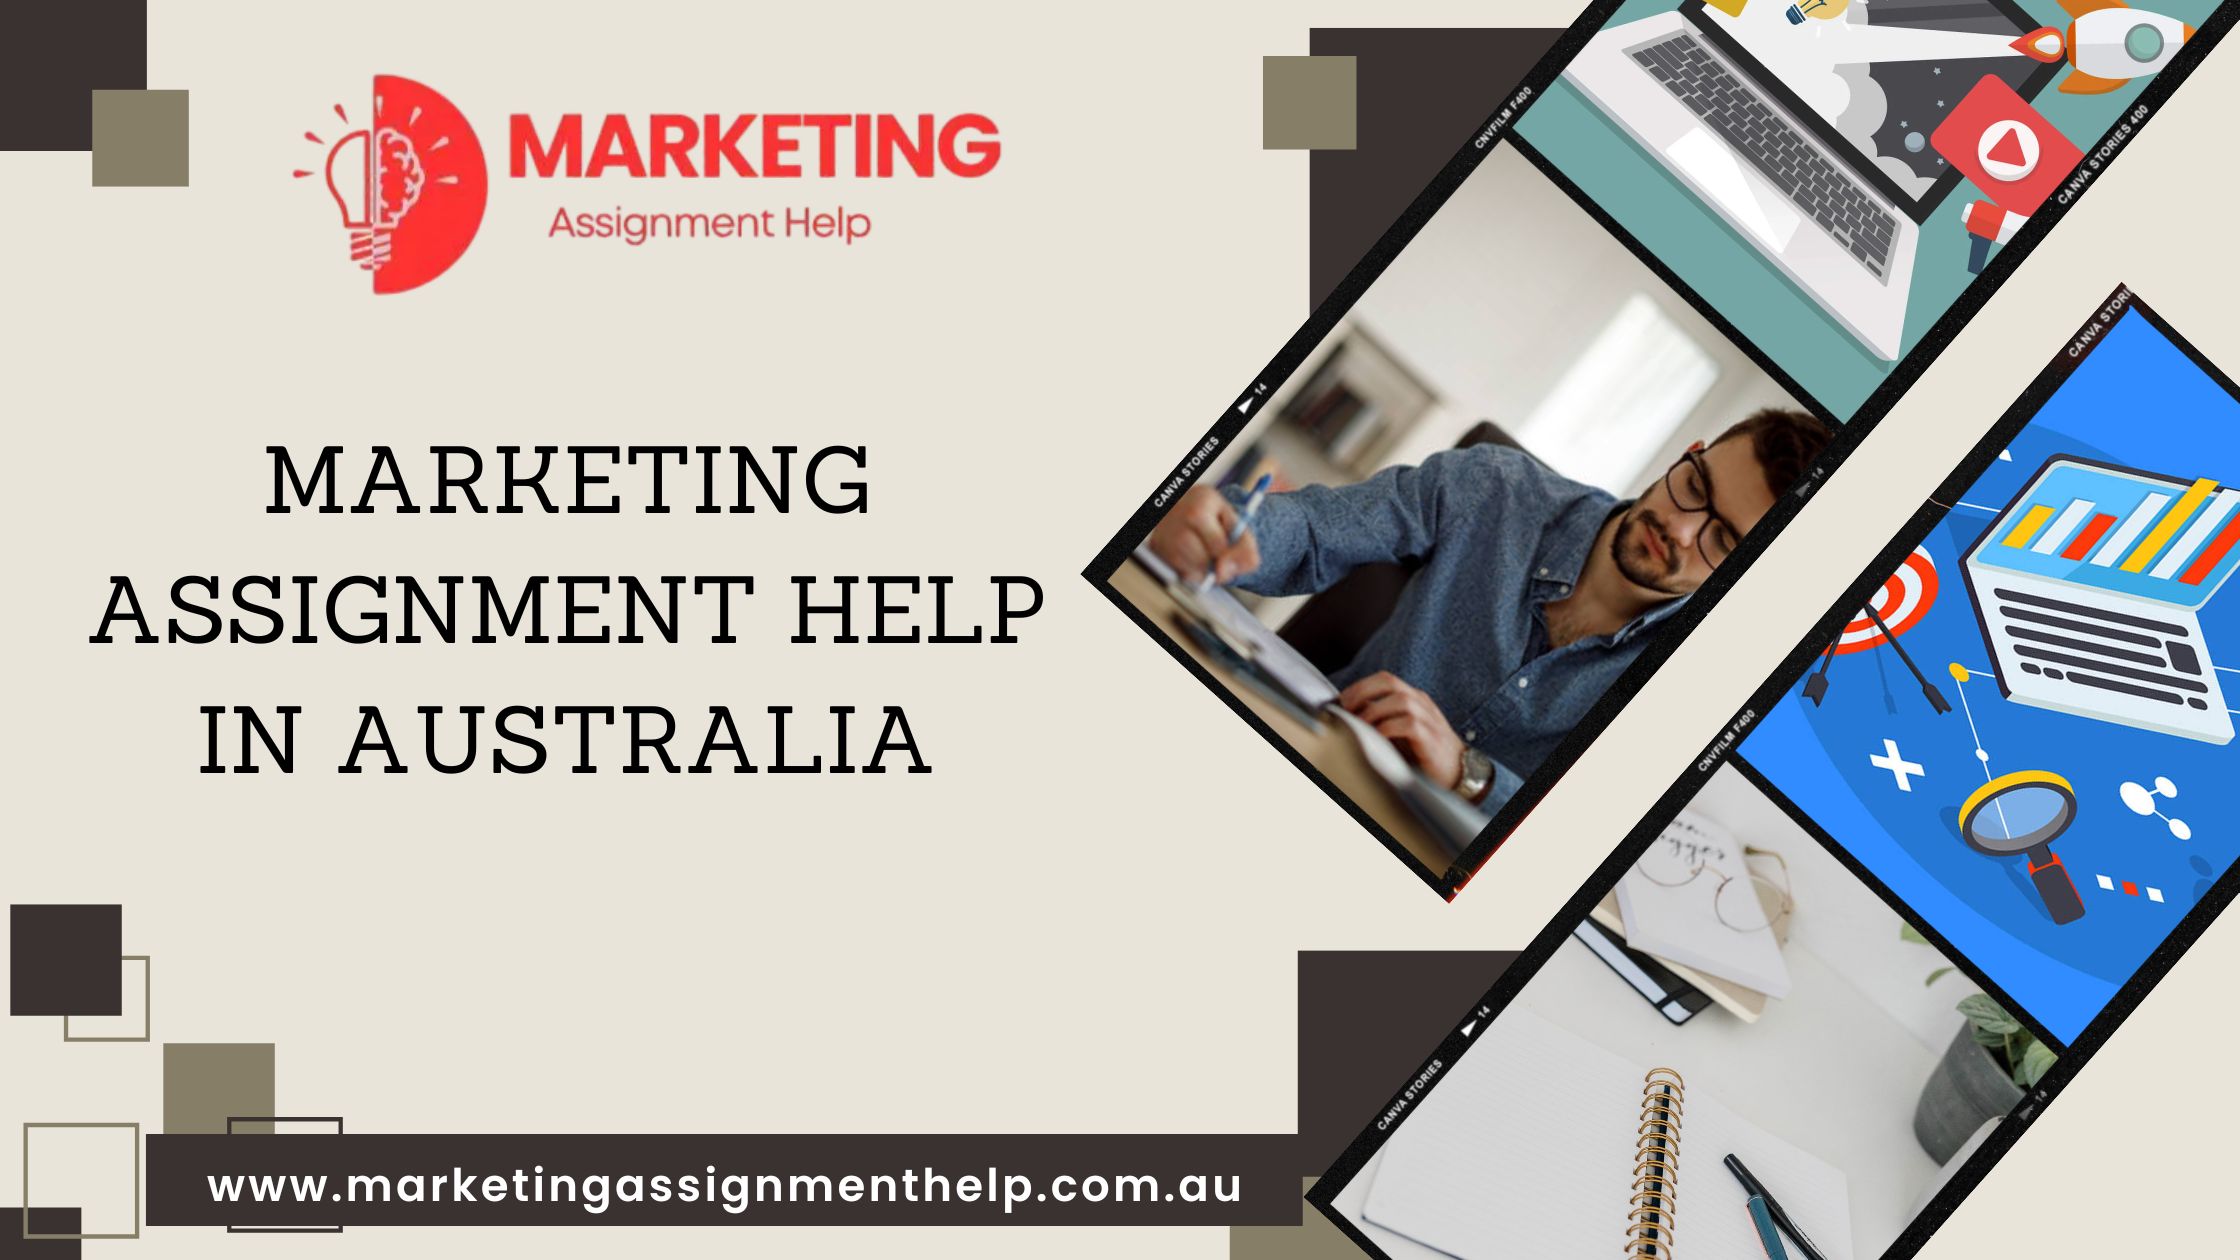 How To Find the Best Marketing Assignment Help Services Online in Australia?